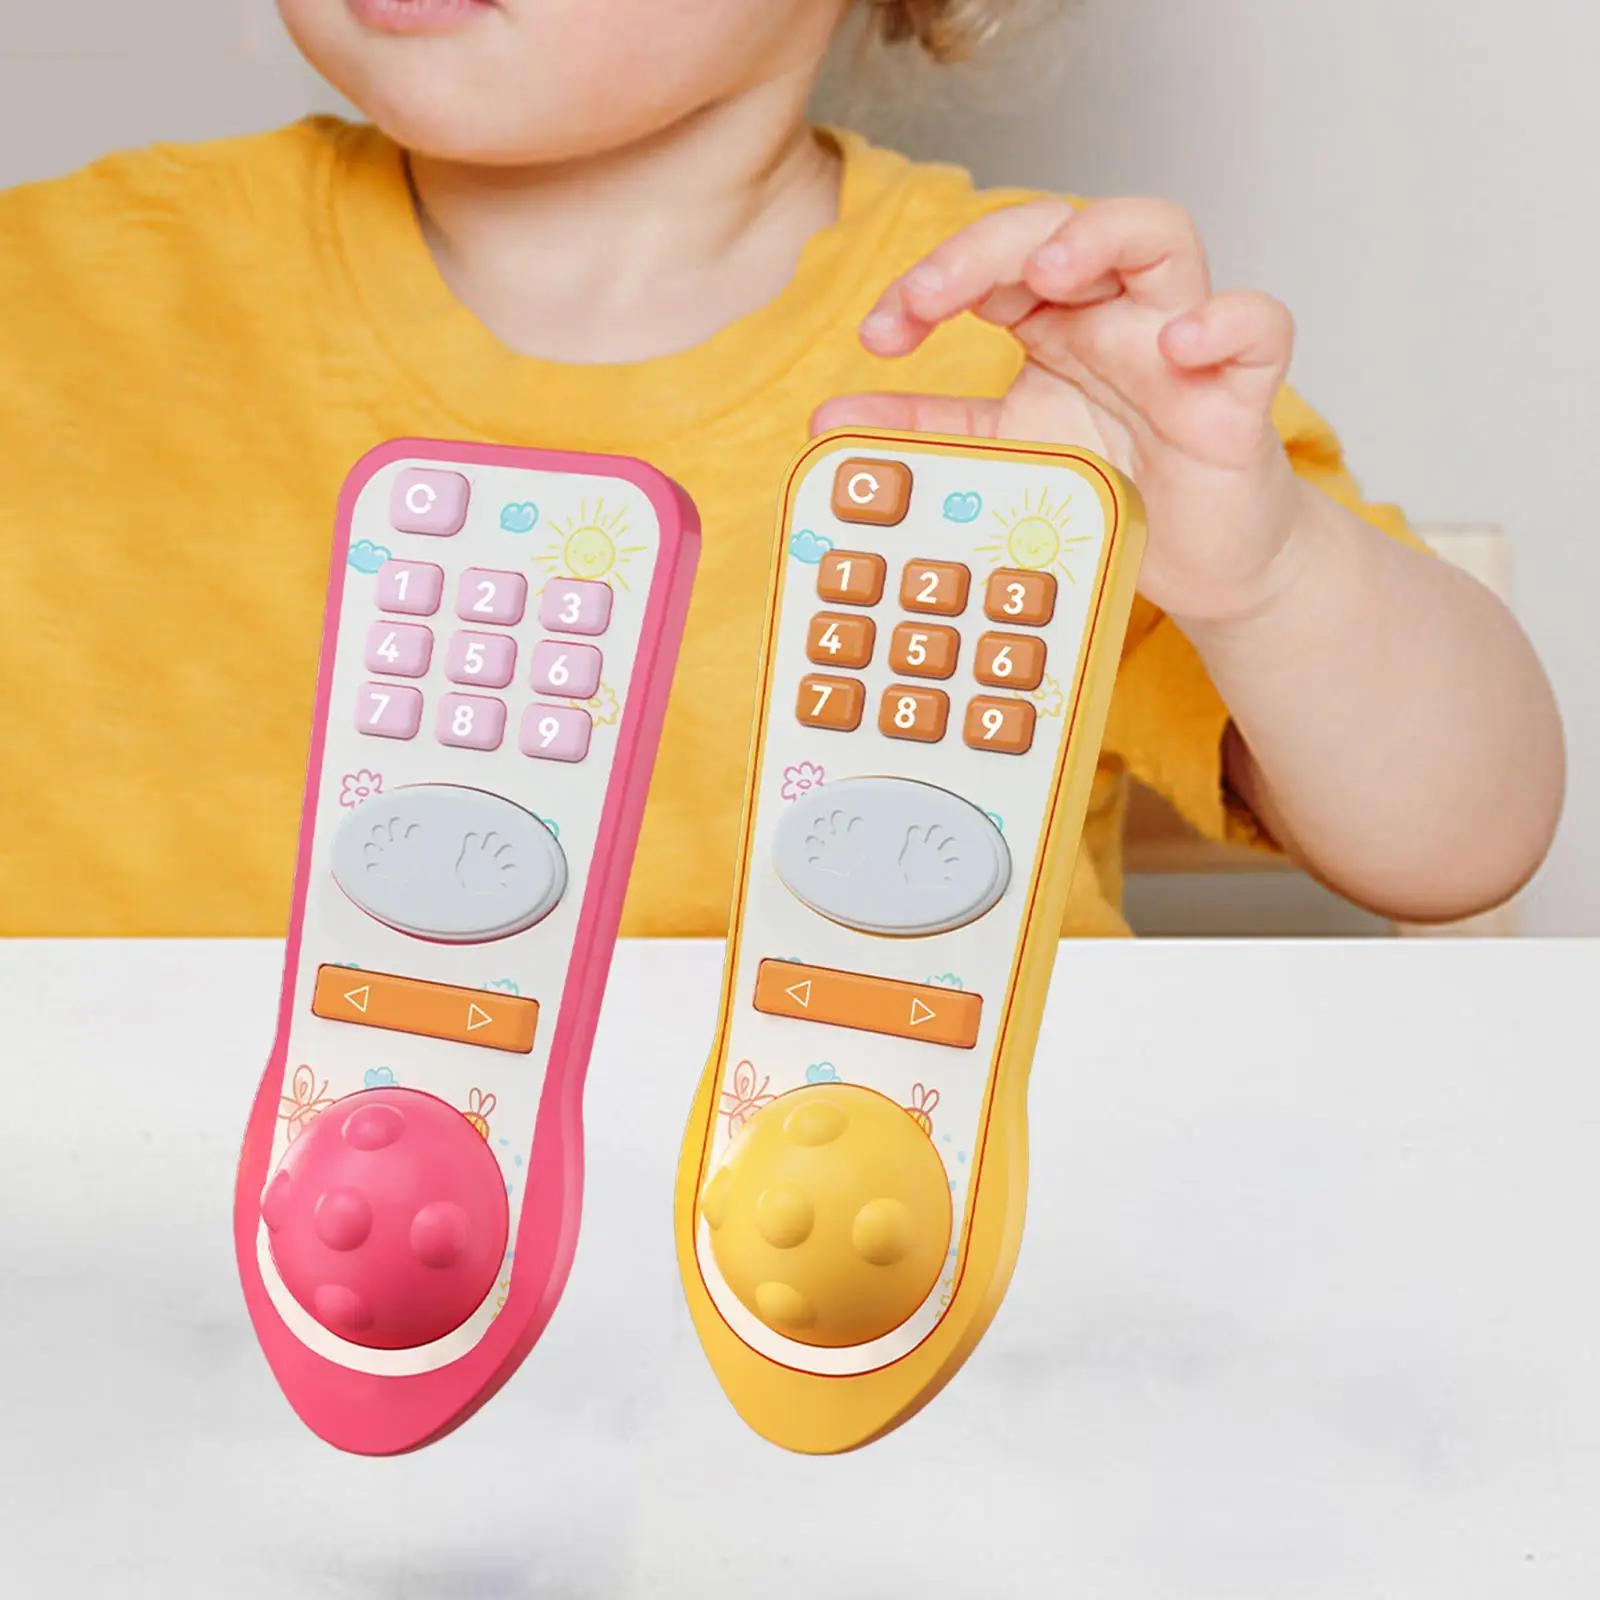 TV Remote Control Toy Realistic Fun Learning Early Education for 12 to 18 Months Boys Girls Toddler Infants Birthday Gifts